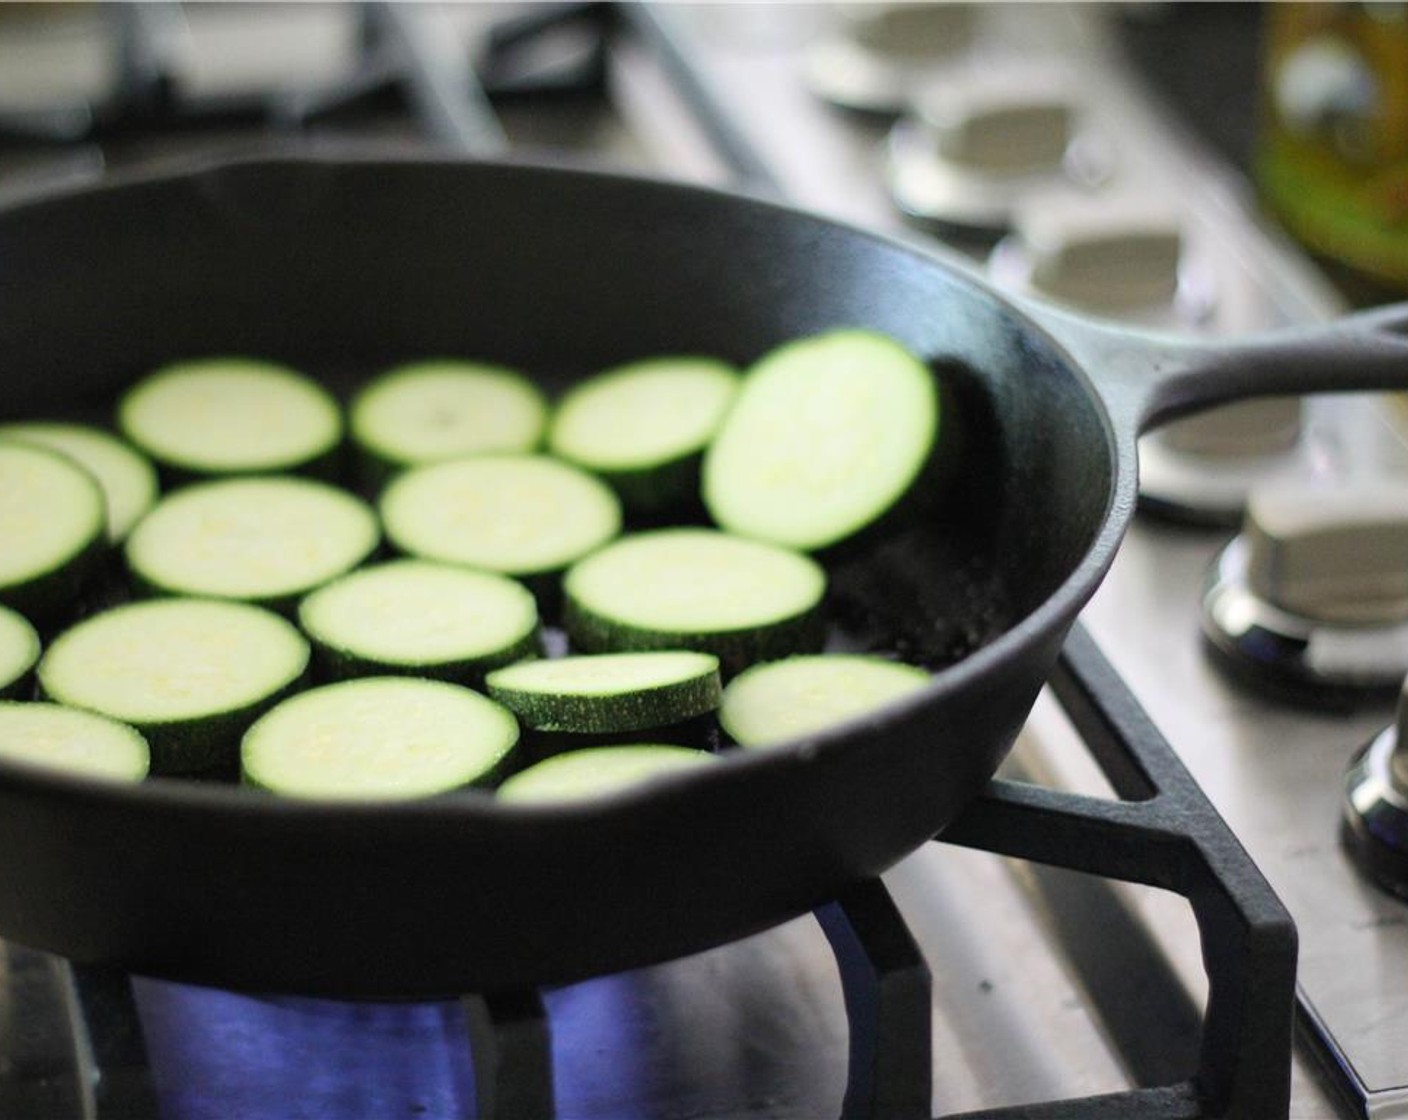 step 2 Slice each Zucchini (3) into about 1/3 inch discs. Sprinkle each side with salt. Heat olive oil in large skillet over medium high heat. Add salted zucchini to skillet and sauté until crisp-tender.